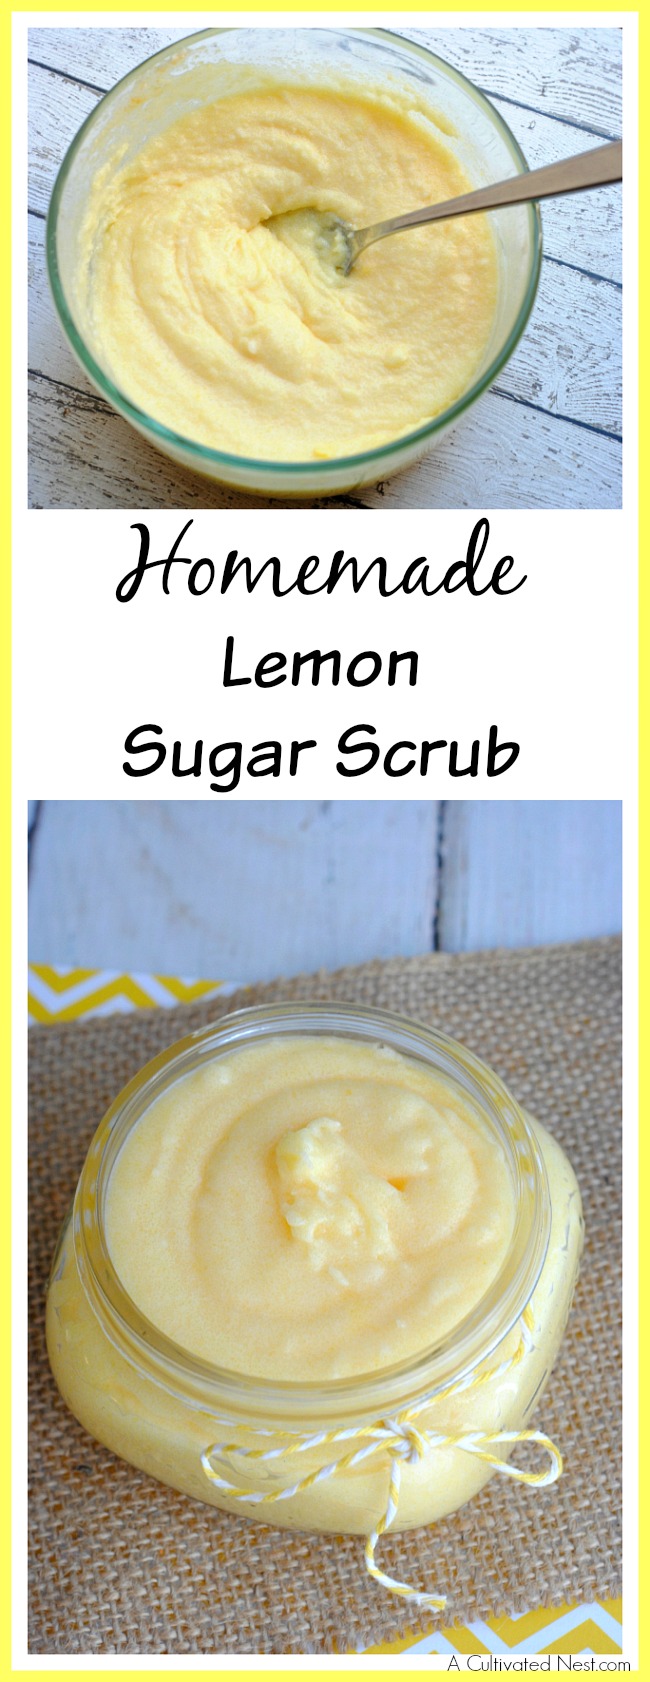 Homemade Lemon Sugar Scrub- A great way to keep your skin beautiful and healthy is to use a body scrub! This homemade lemon sugar scrub will clean your skin and leave it moisturized! This makes a great gift! | DIY sugar scrub, sugar scrub tutorial, DIY gift idea, citrus sugar scrub, homemade gift, #sugarScrub #DIYGift #ACultivatedNest